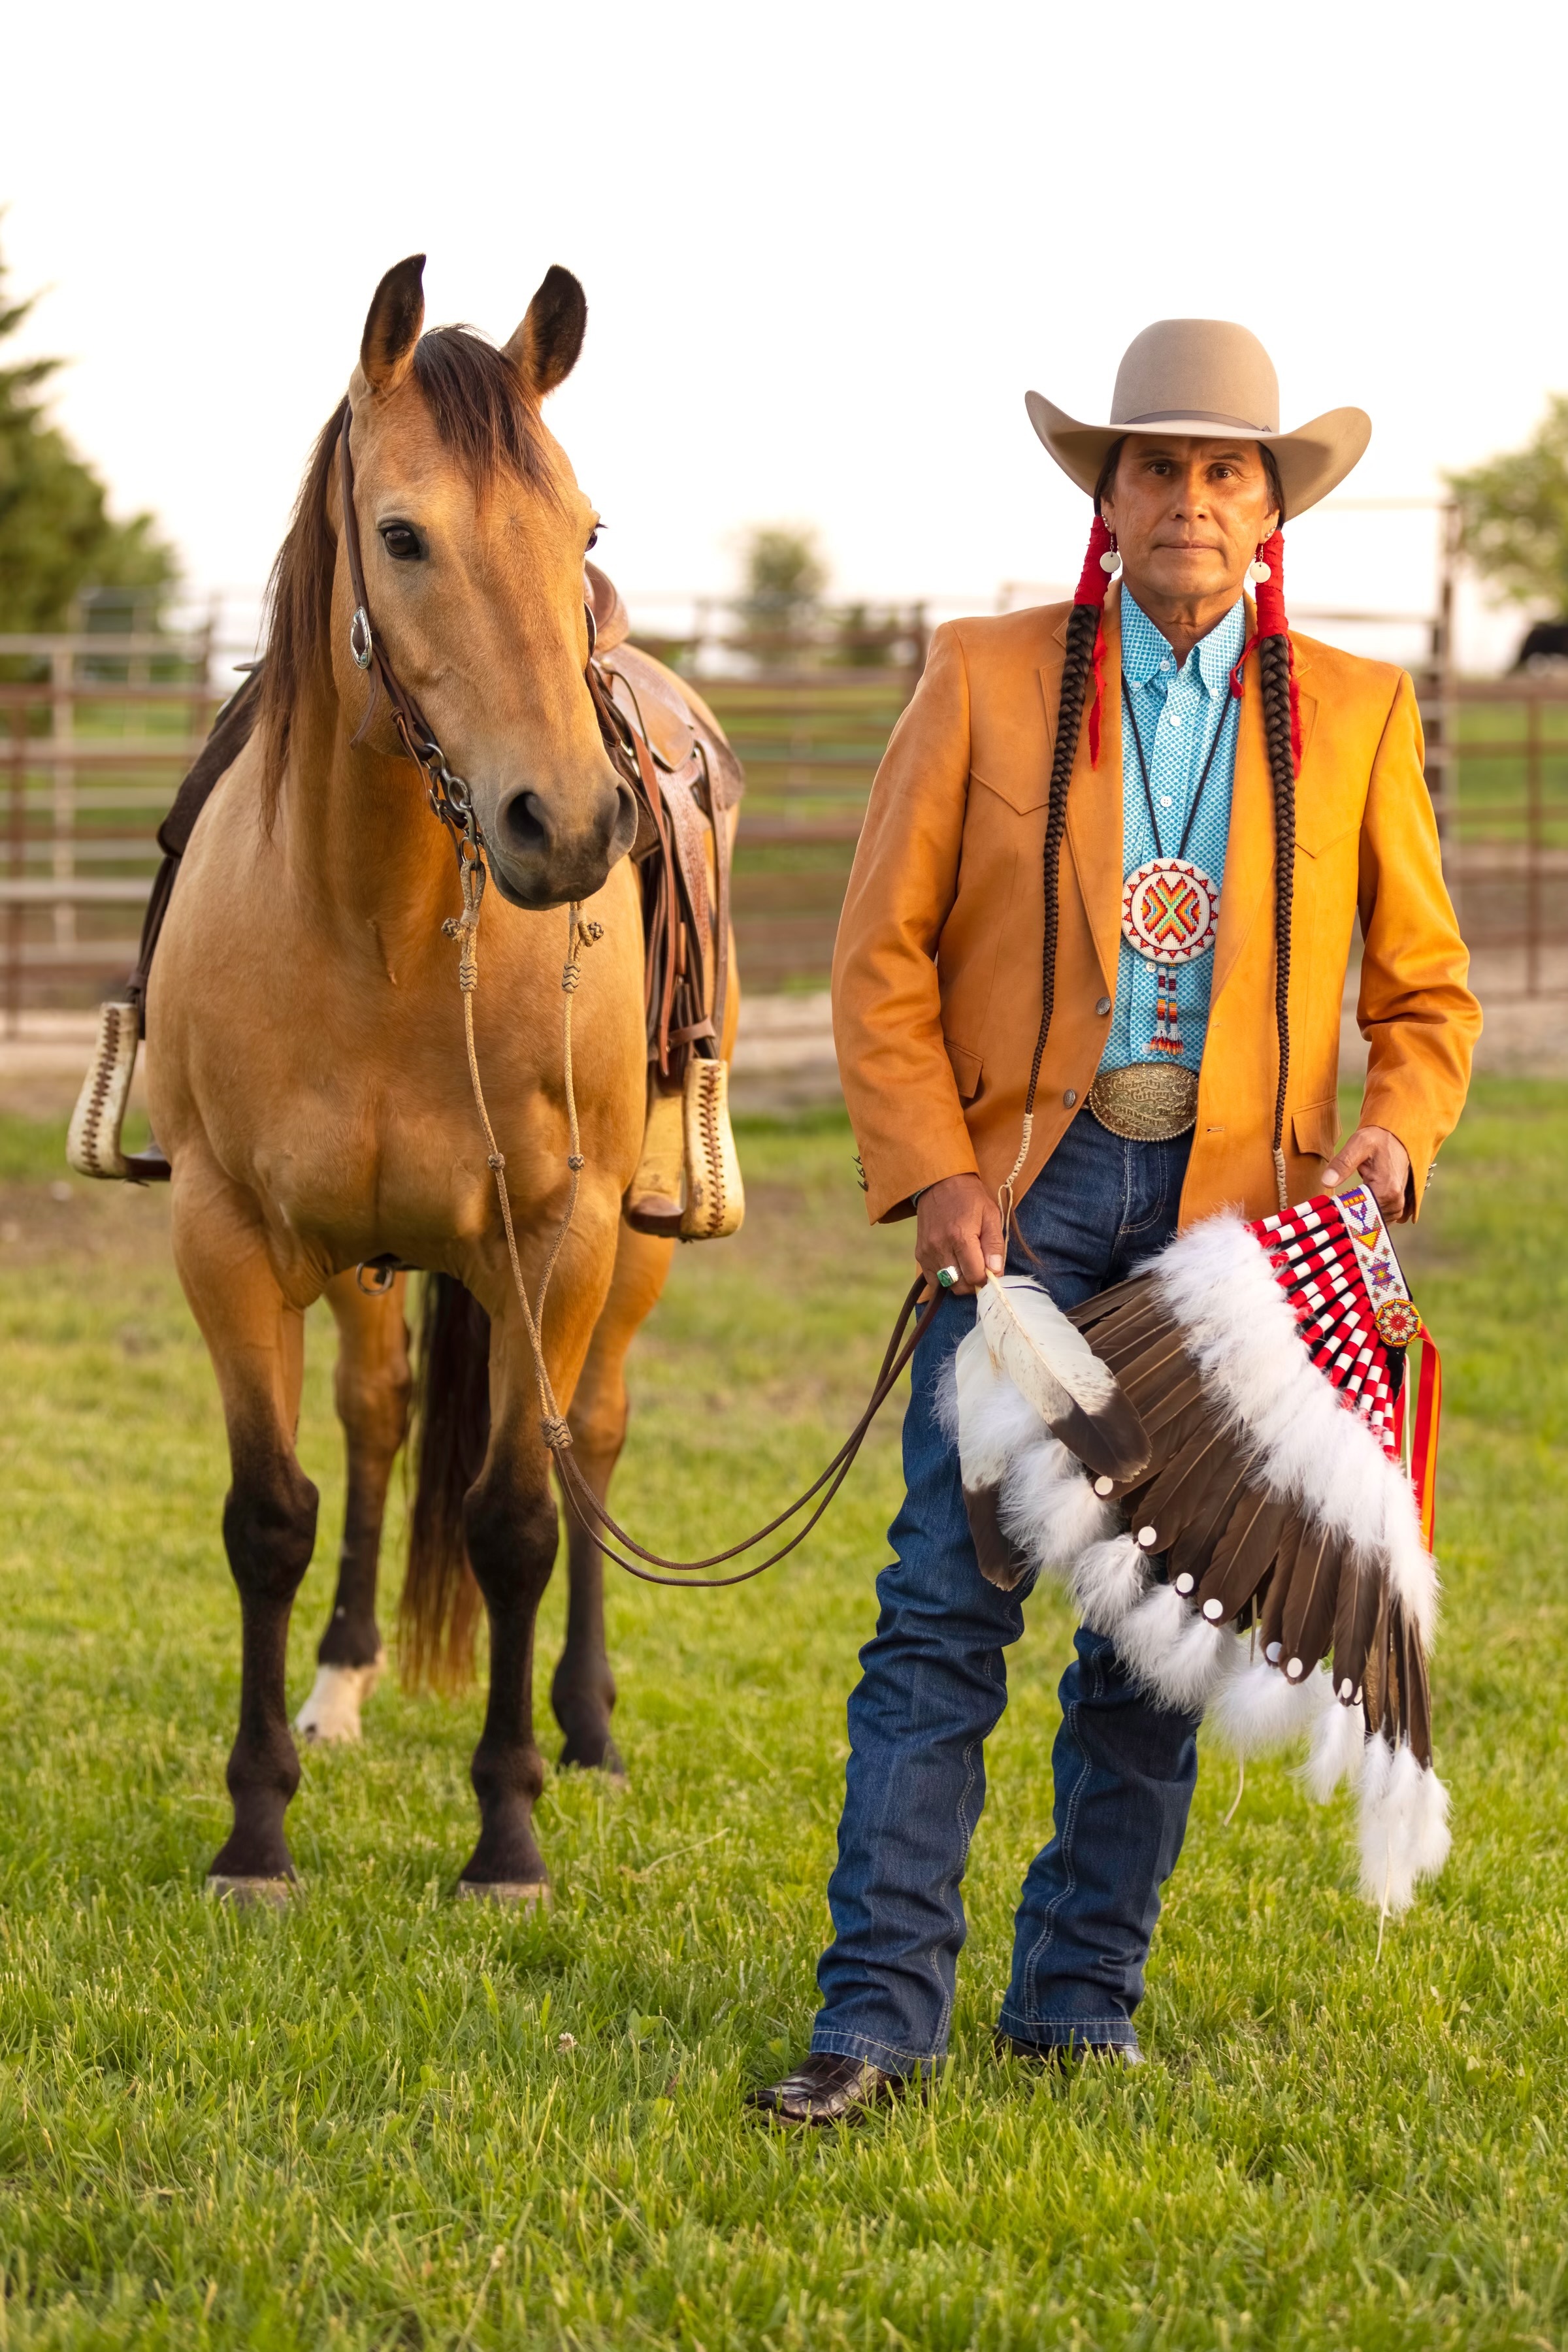 Get The Yellowstone Look At Home - Cowboys and Indians Magazine